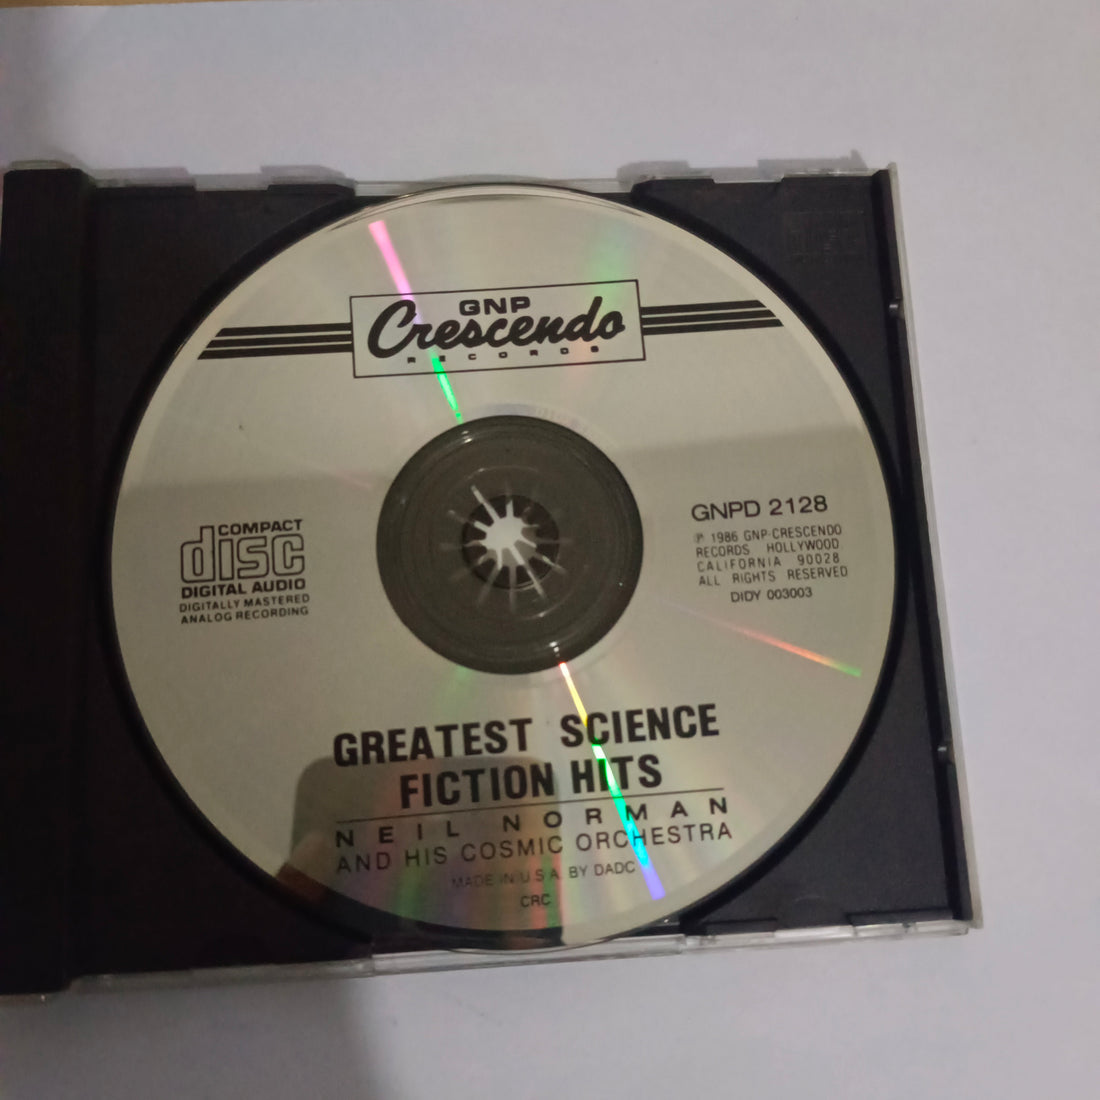 Neil Norman And His Cosmic Orchestra - Greatest Science Fiction Hits (CD) (VG+)